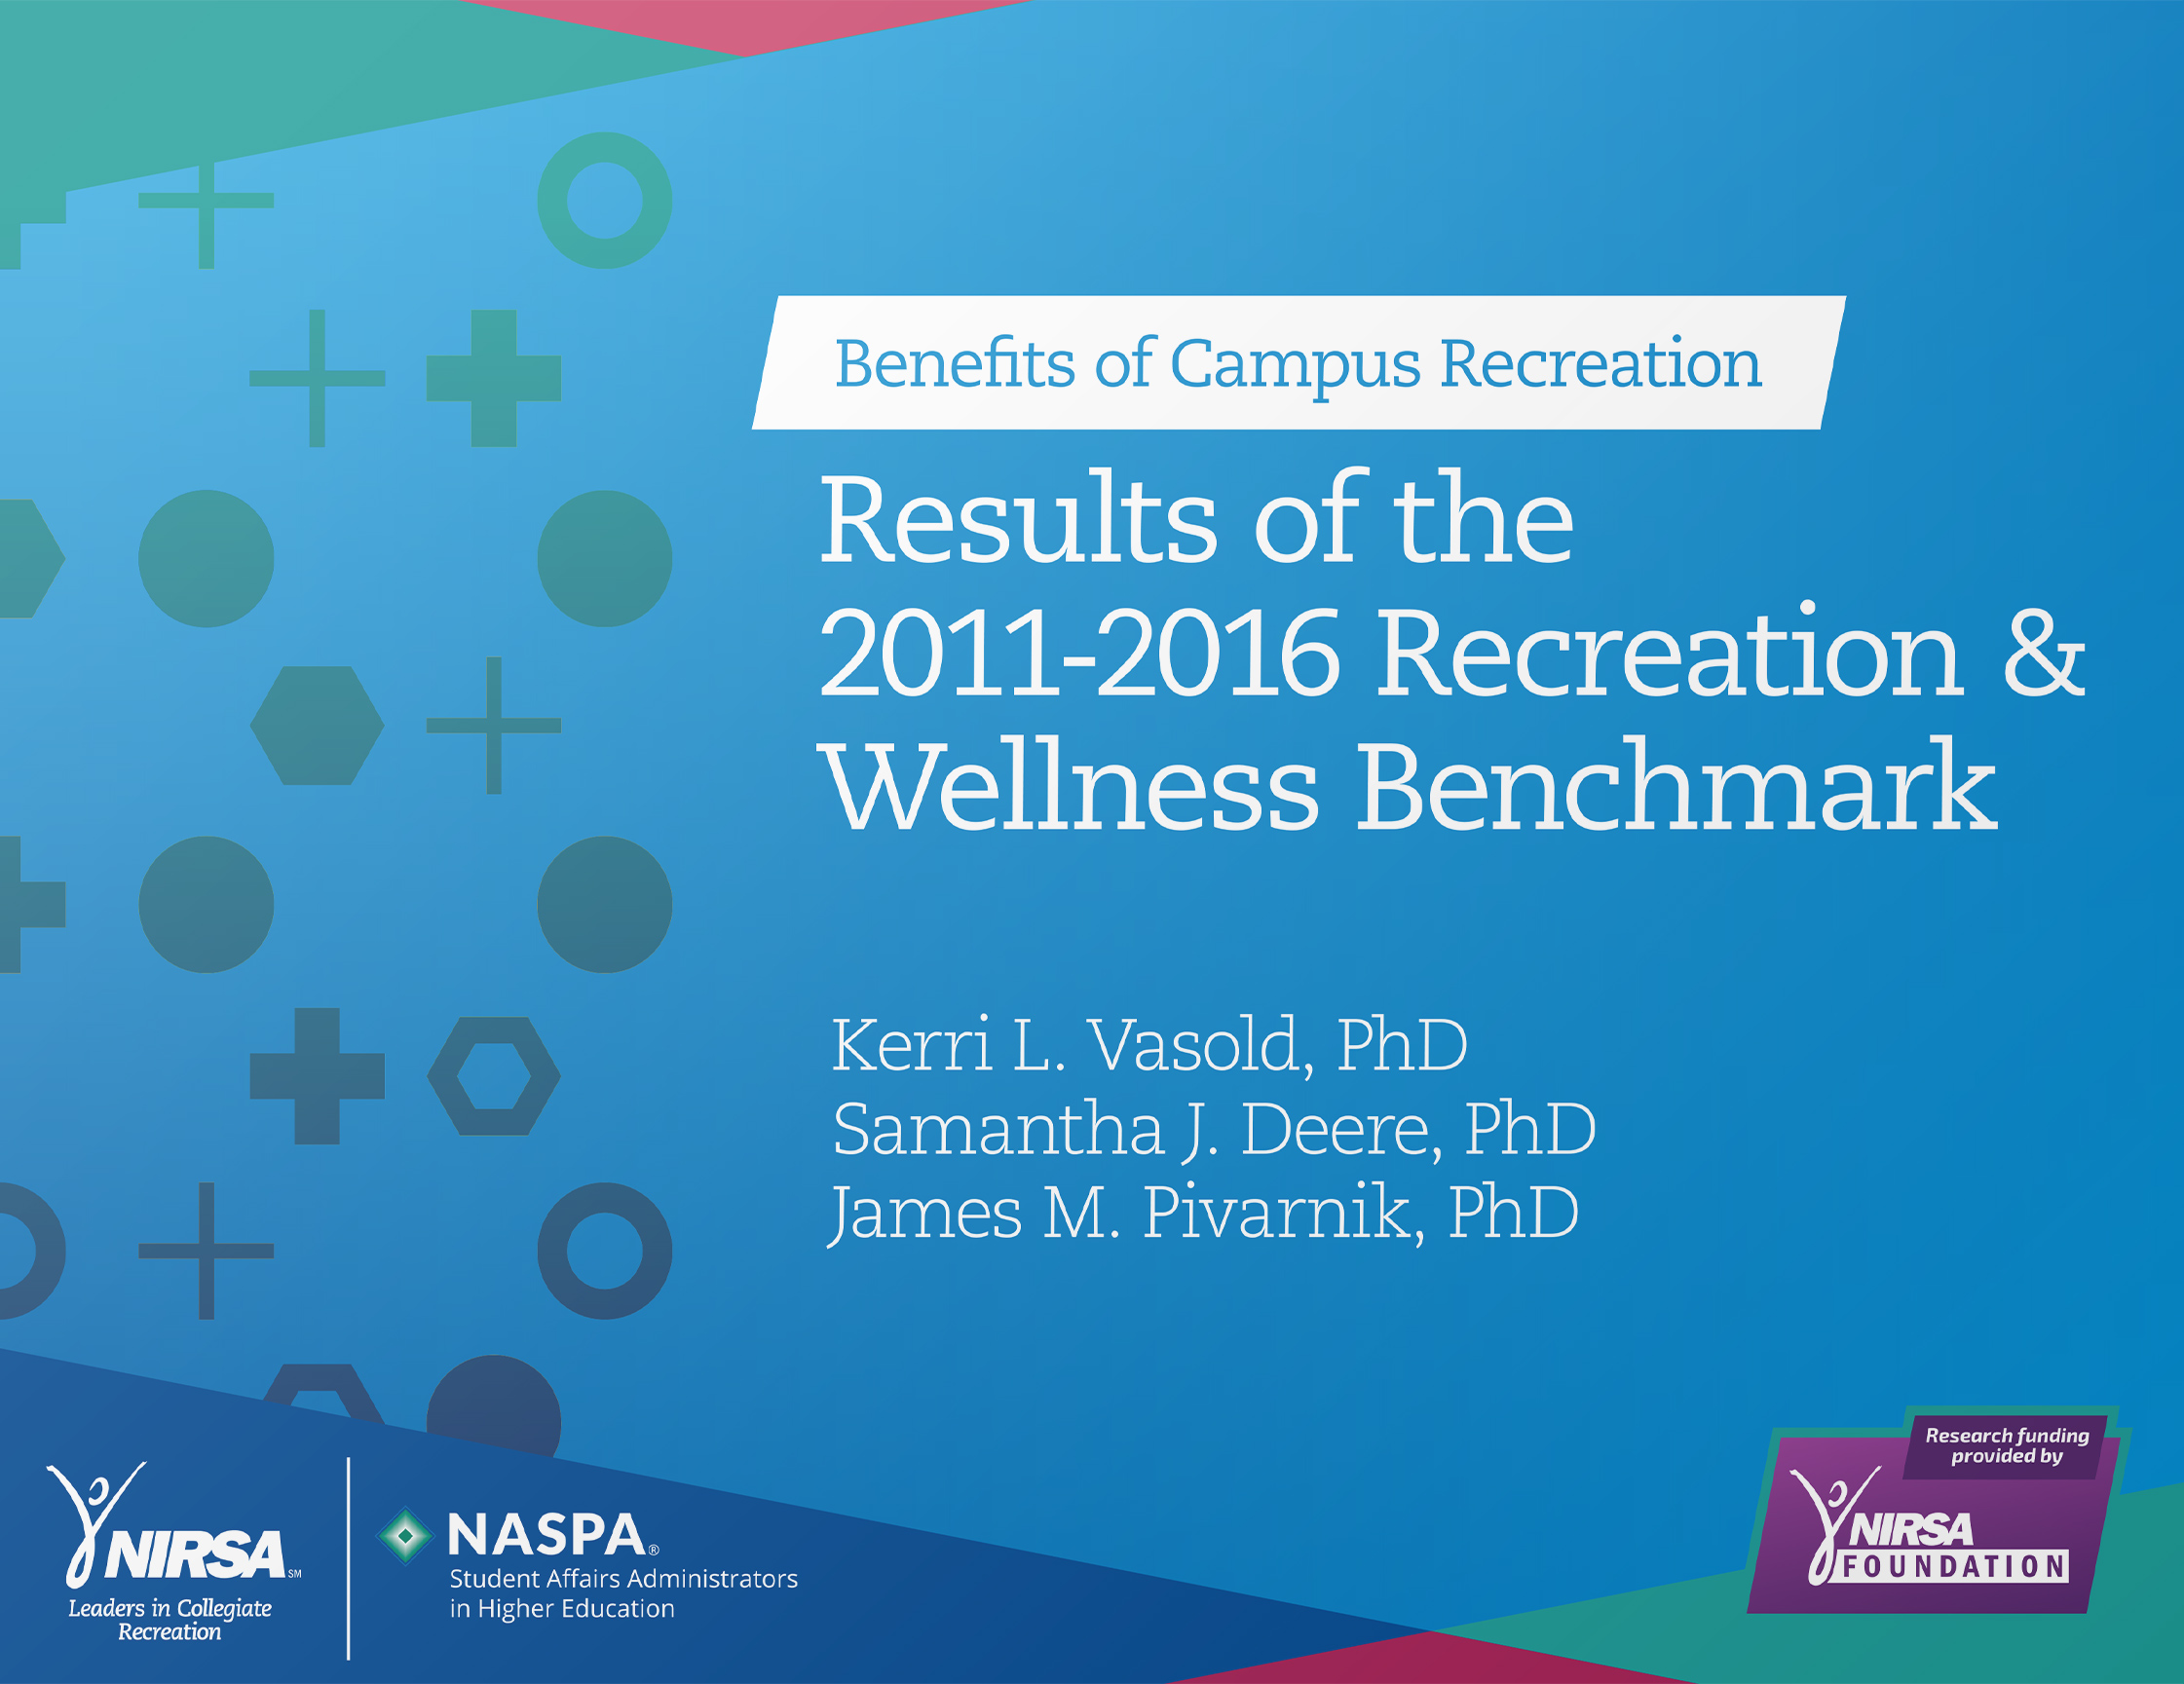 Download the Results of the 2011-2016 Recreation & Wellness Benchmark Report